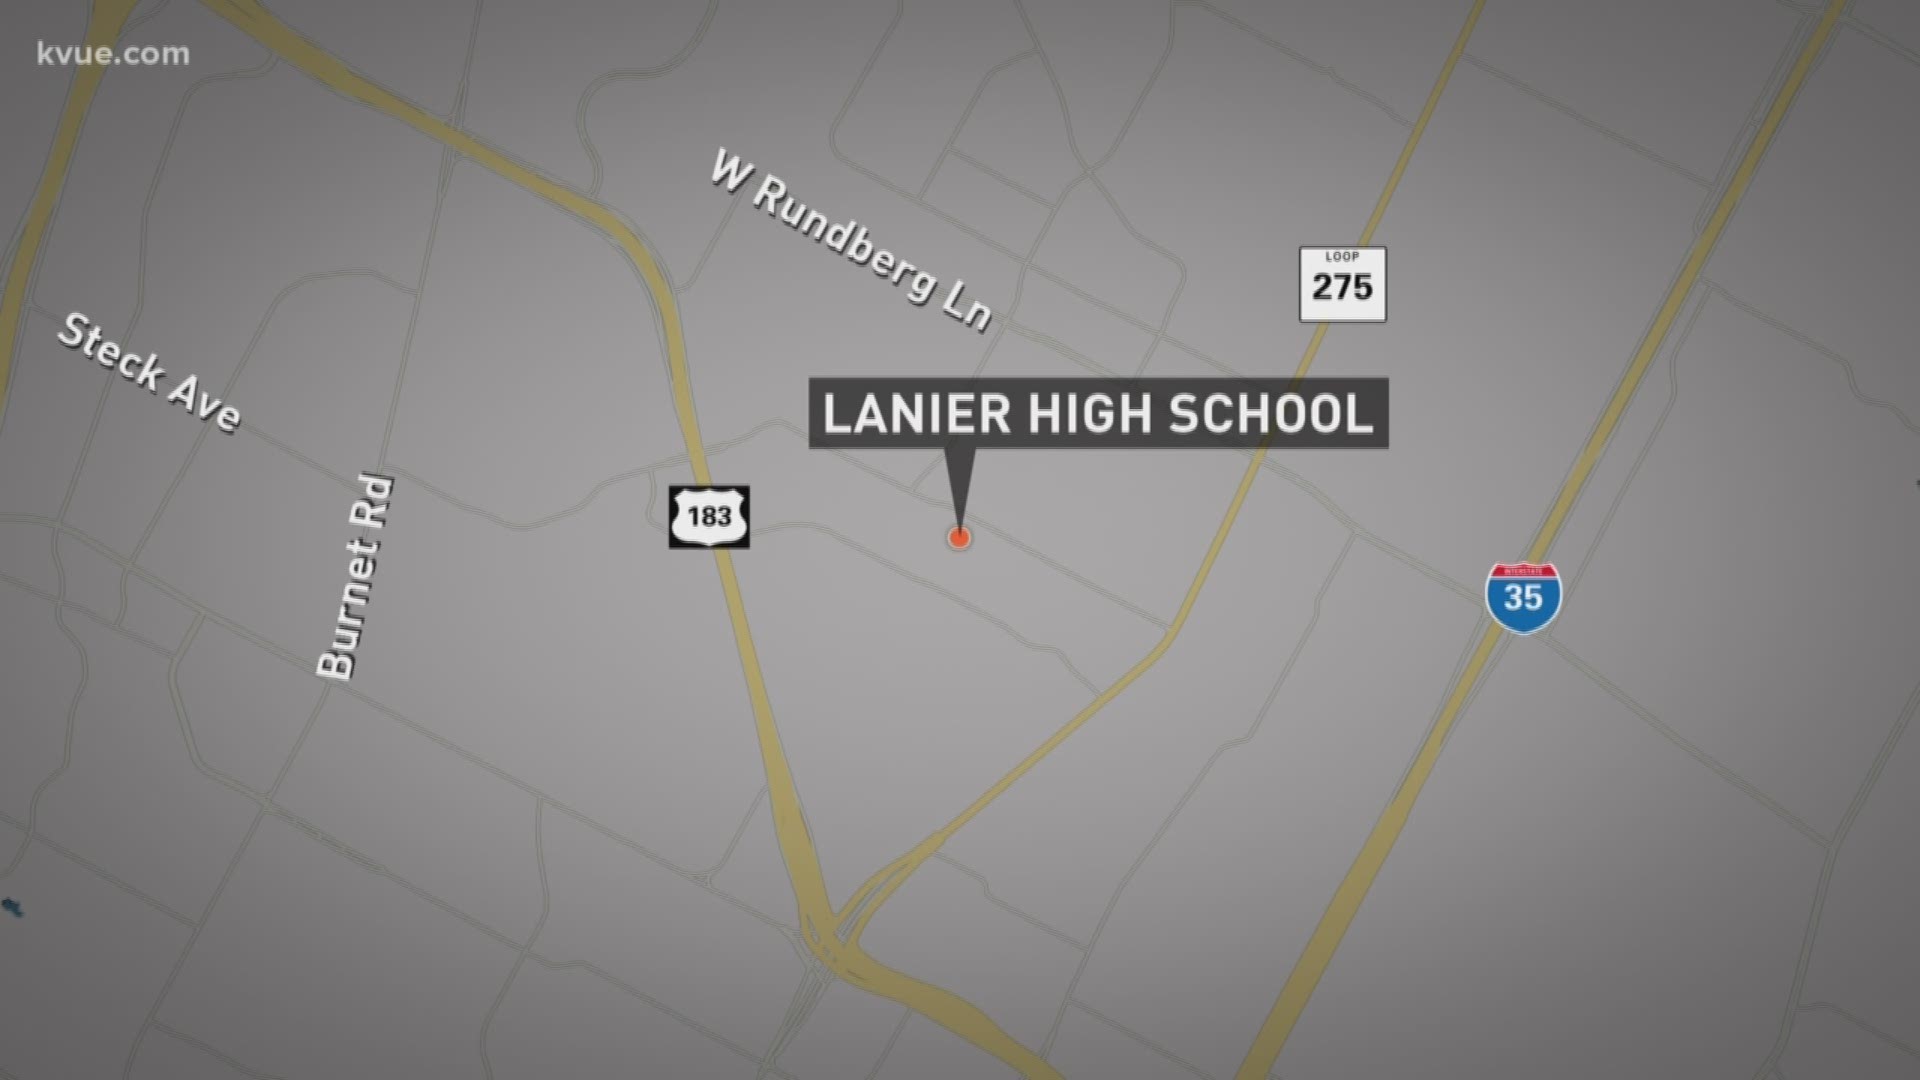 Police arrested a 15-year-old after he flashed what appeared to be a handgun in the hallway at Lanier High School.